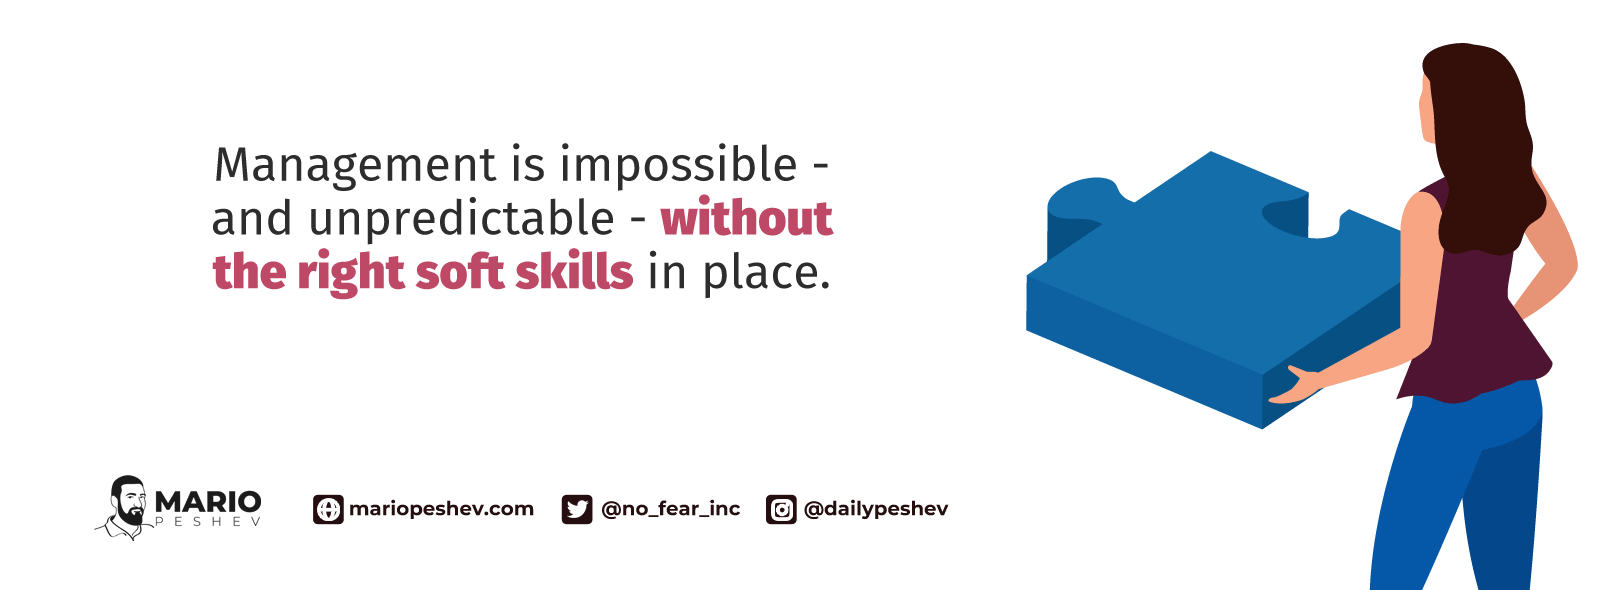 Management is impossible - and unpredictable - without the right soft skills in place.